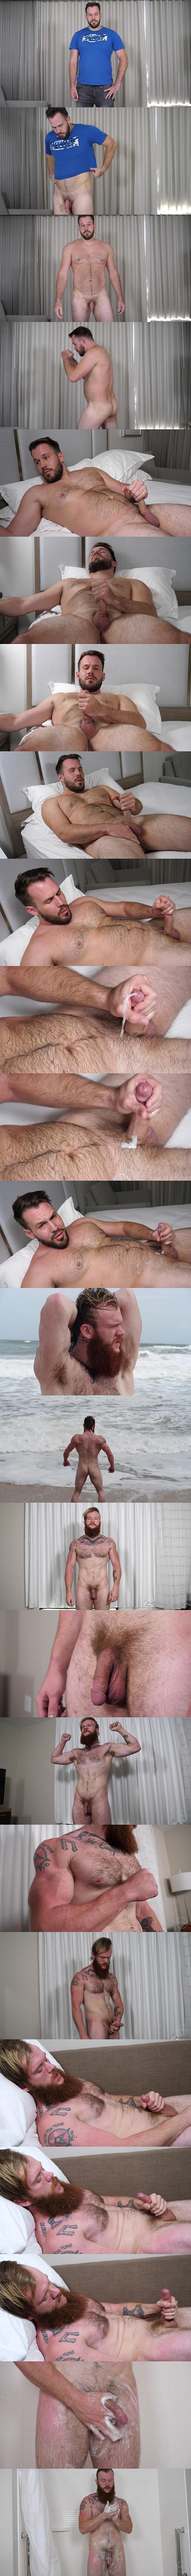 Theguysite - tall, masculine hairy straight hunk Harry and bearded cocky stud Jax Norseman get naked for the first time on camera before they jerk off 02